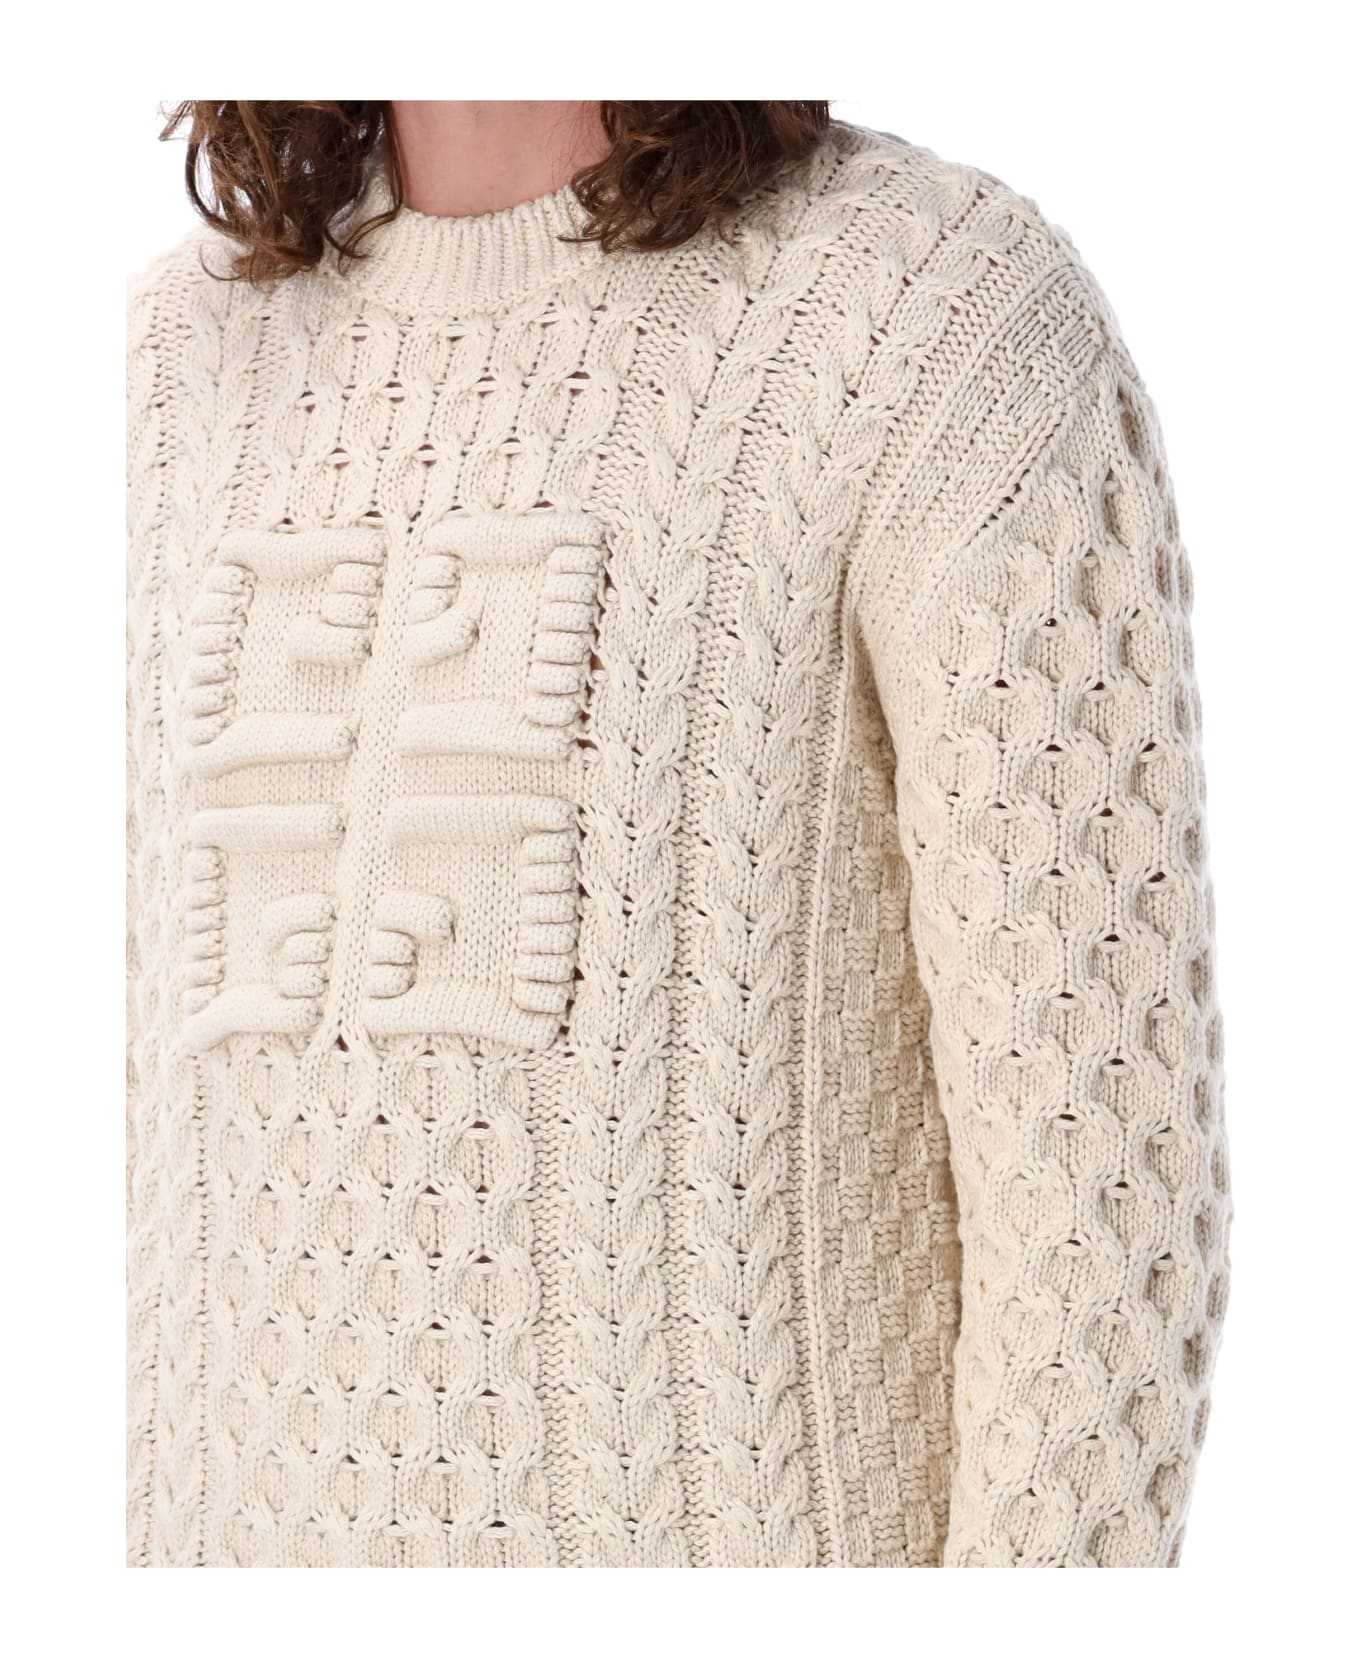 Givenchy 4g Knit Sweater - WHITE